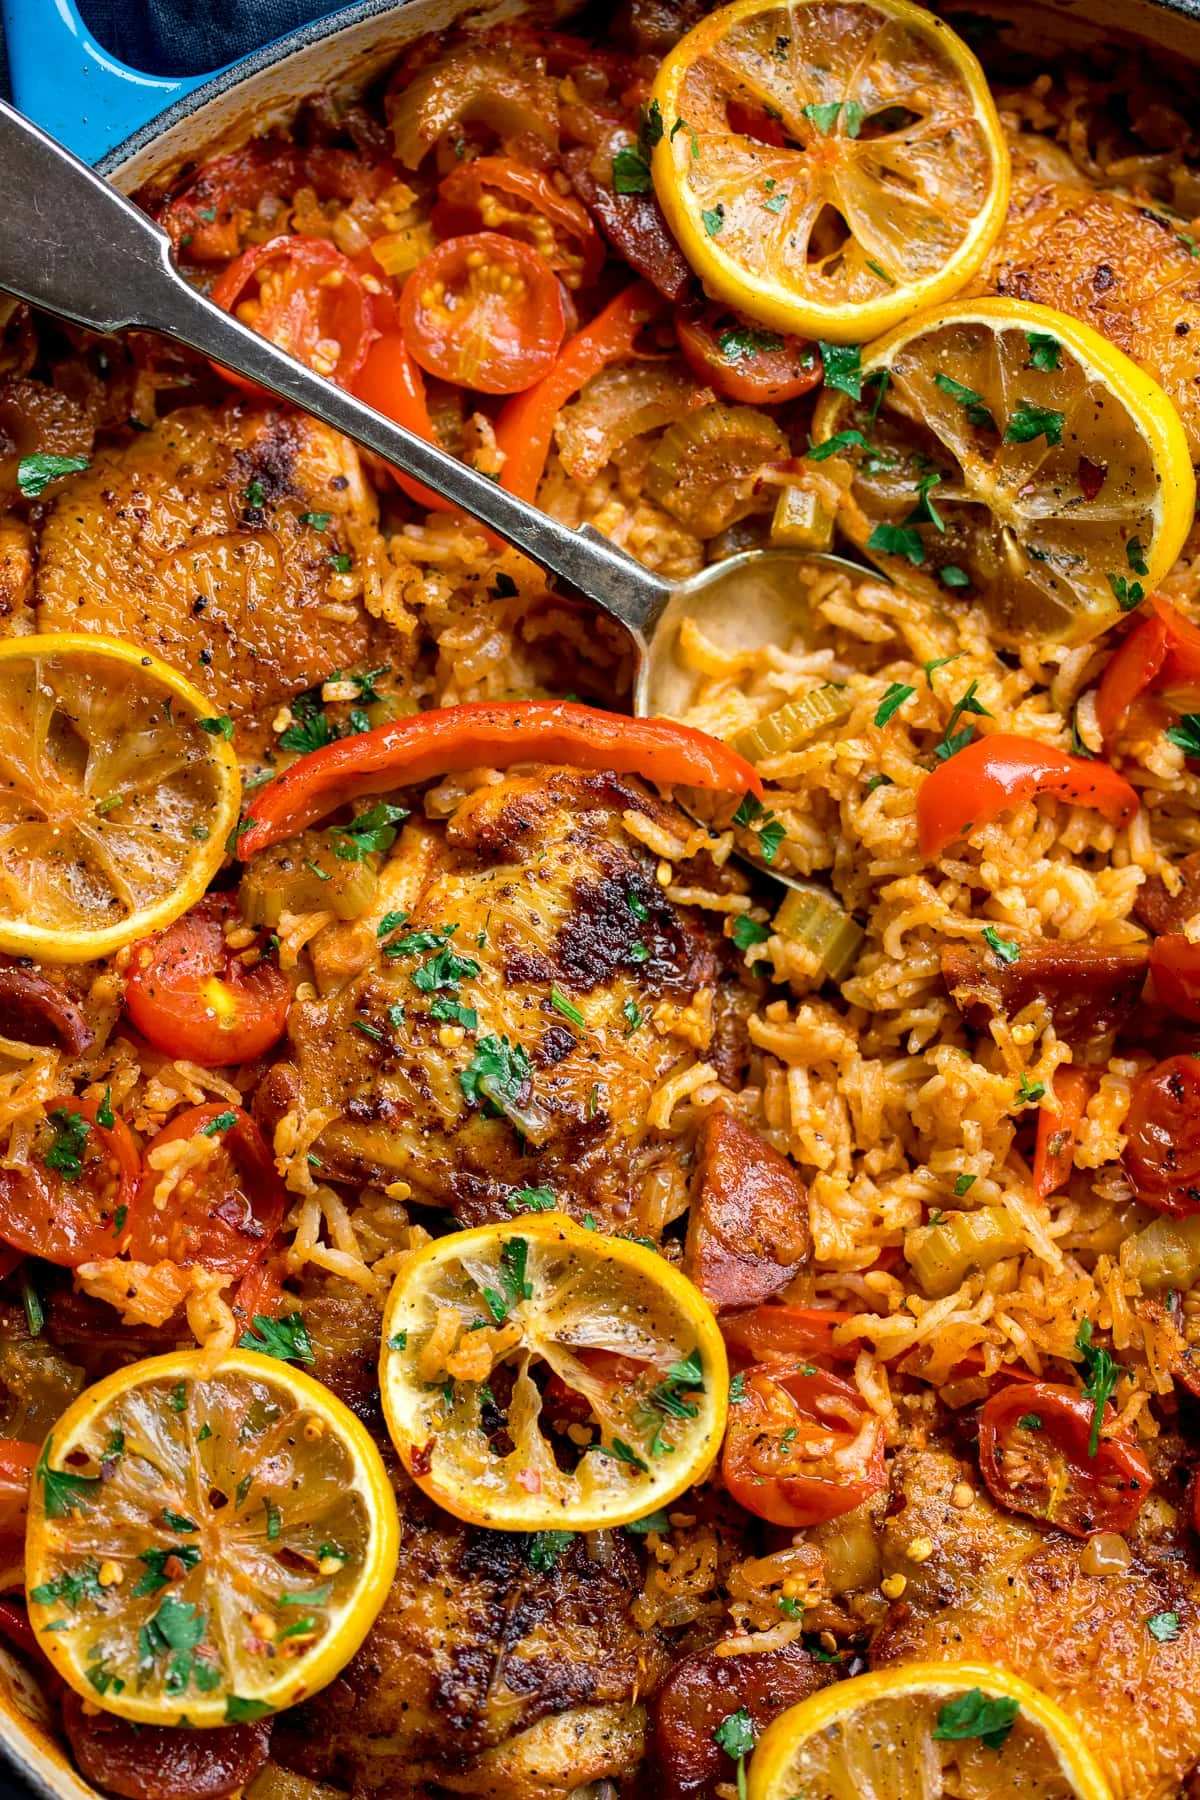 Overhead of Spanish chicken and rice with lemon slices, tomato and red peppers in a blue pan